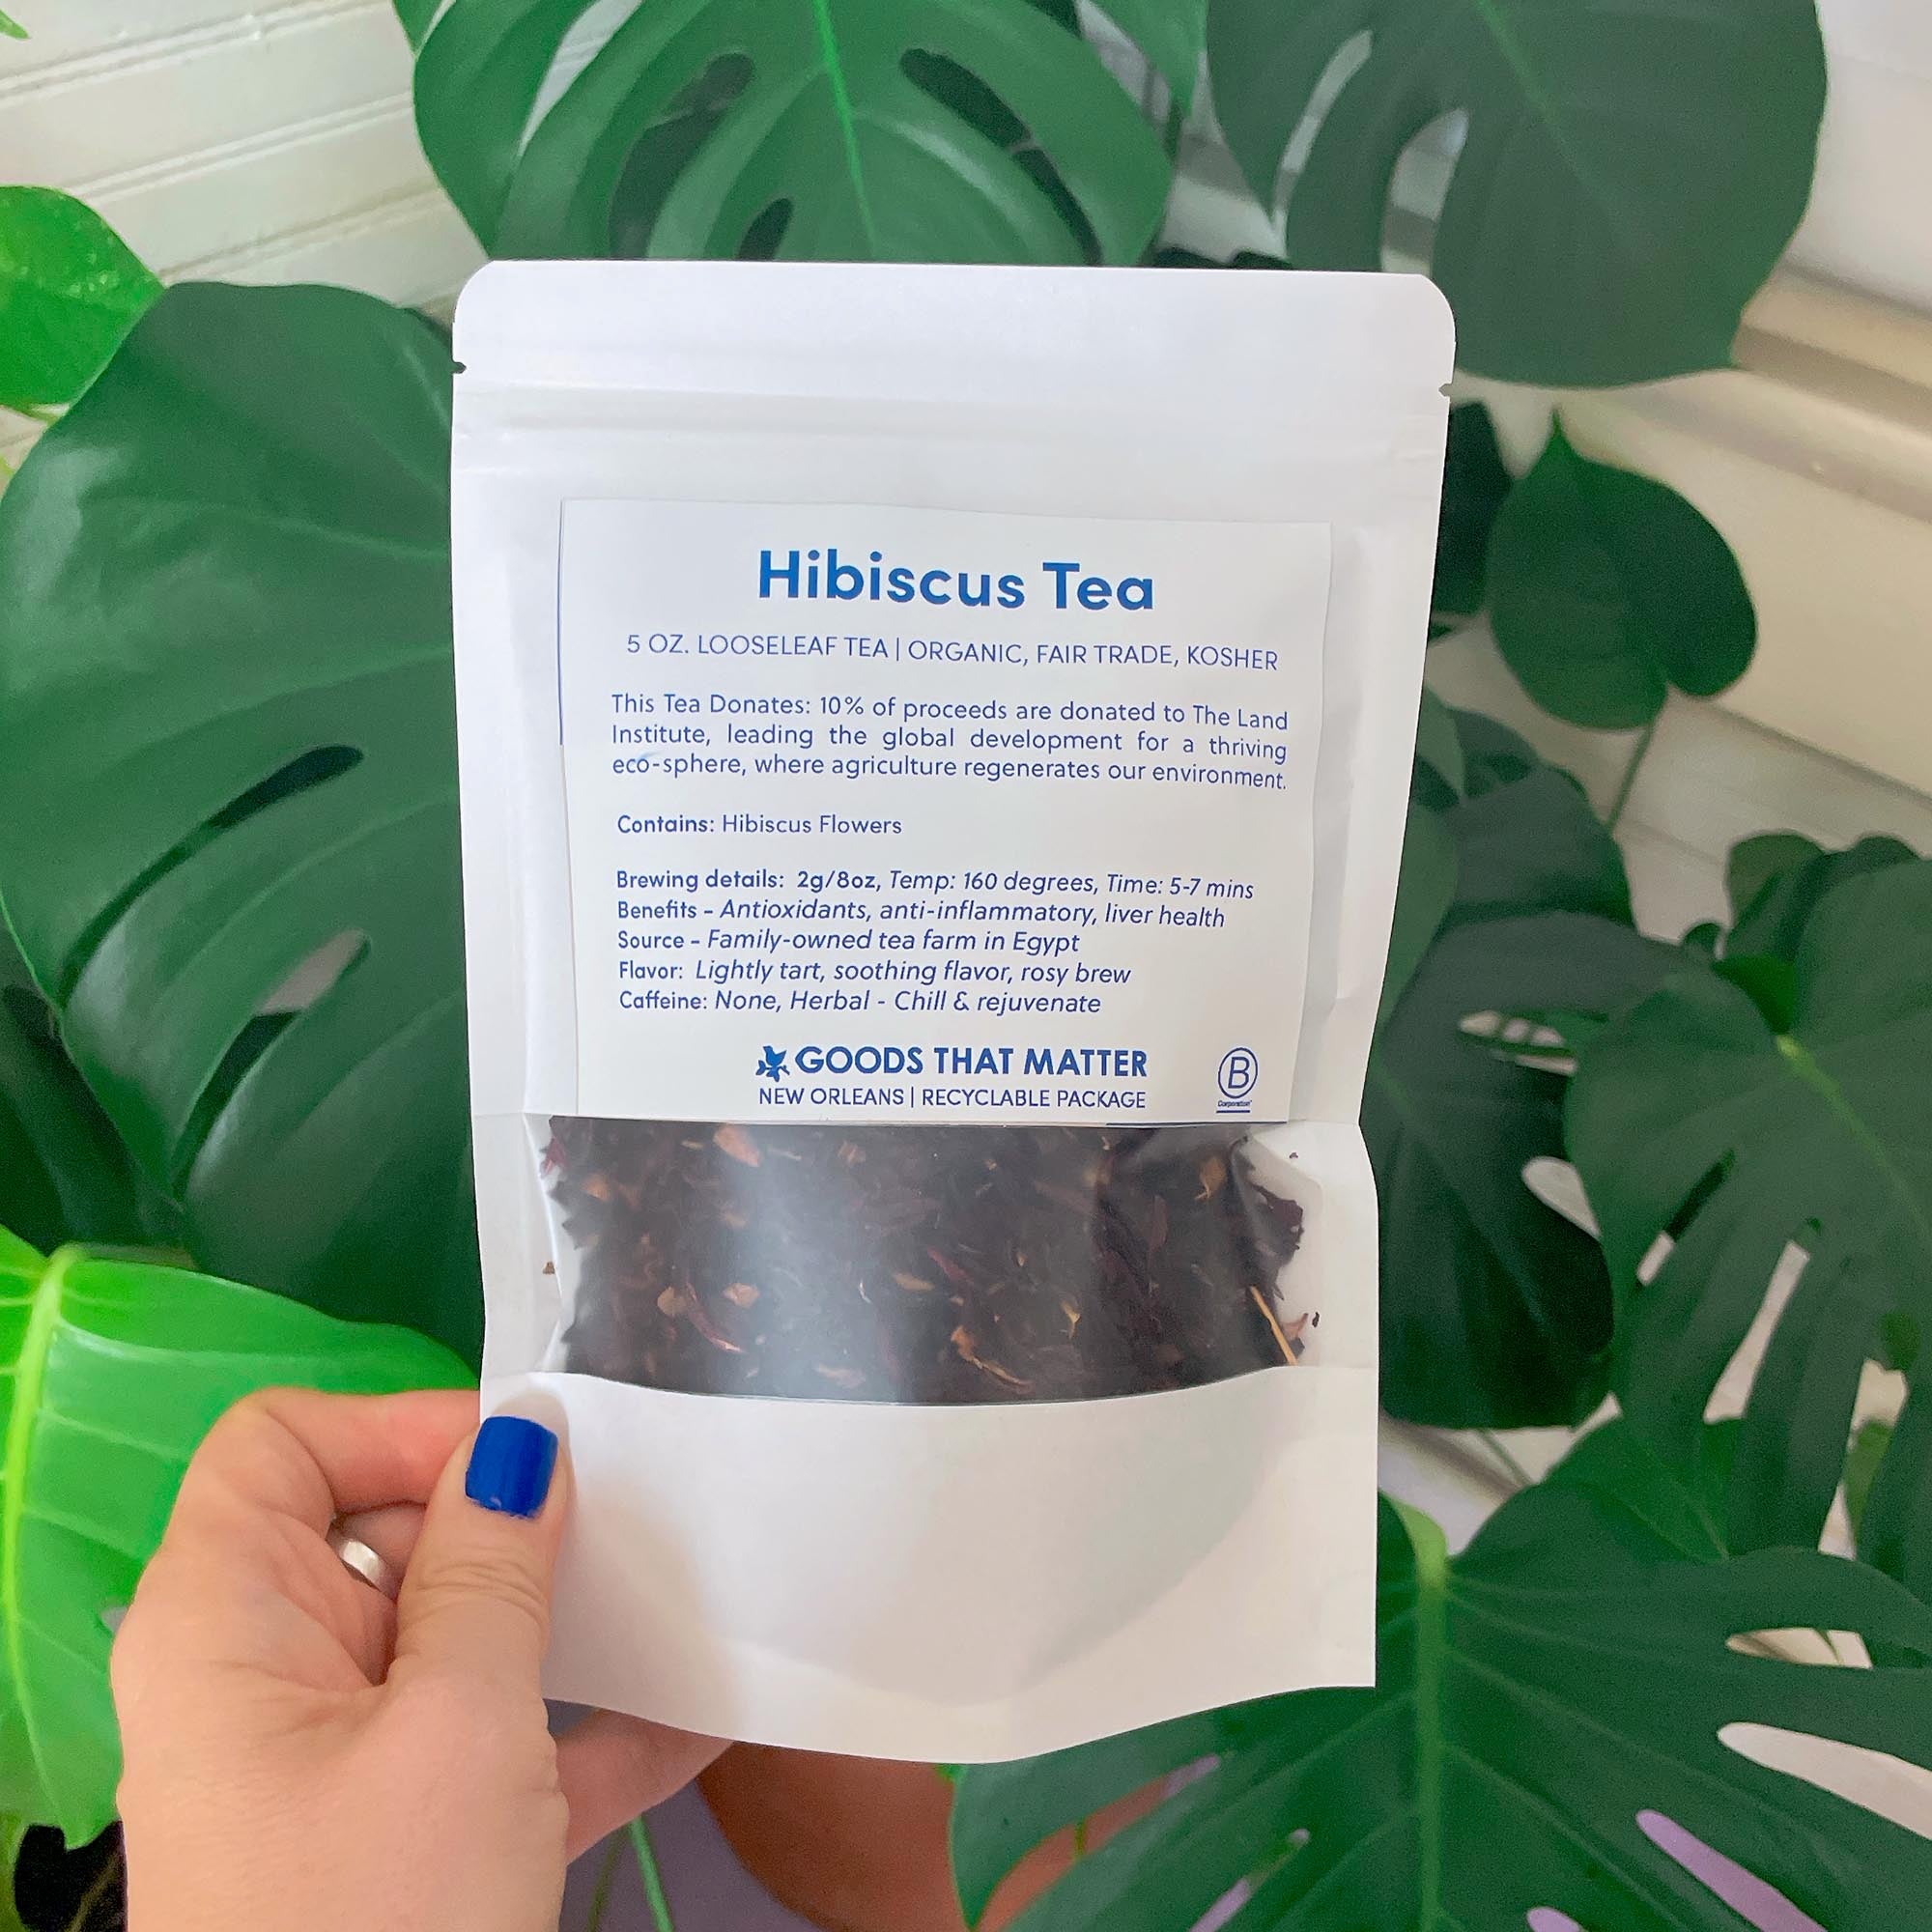 Hibiscus Looseleaf Benevolent Tea - Gives to the Land Institute